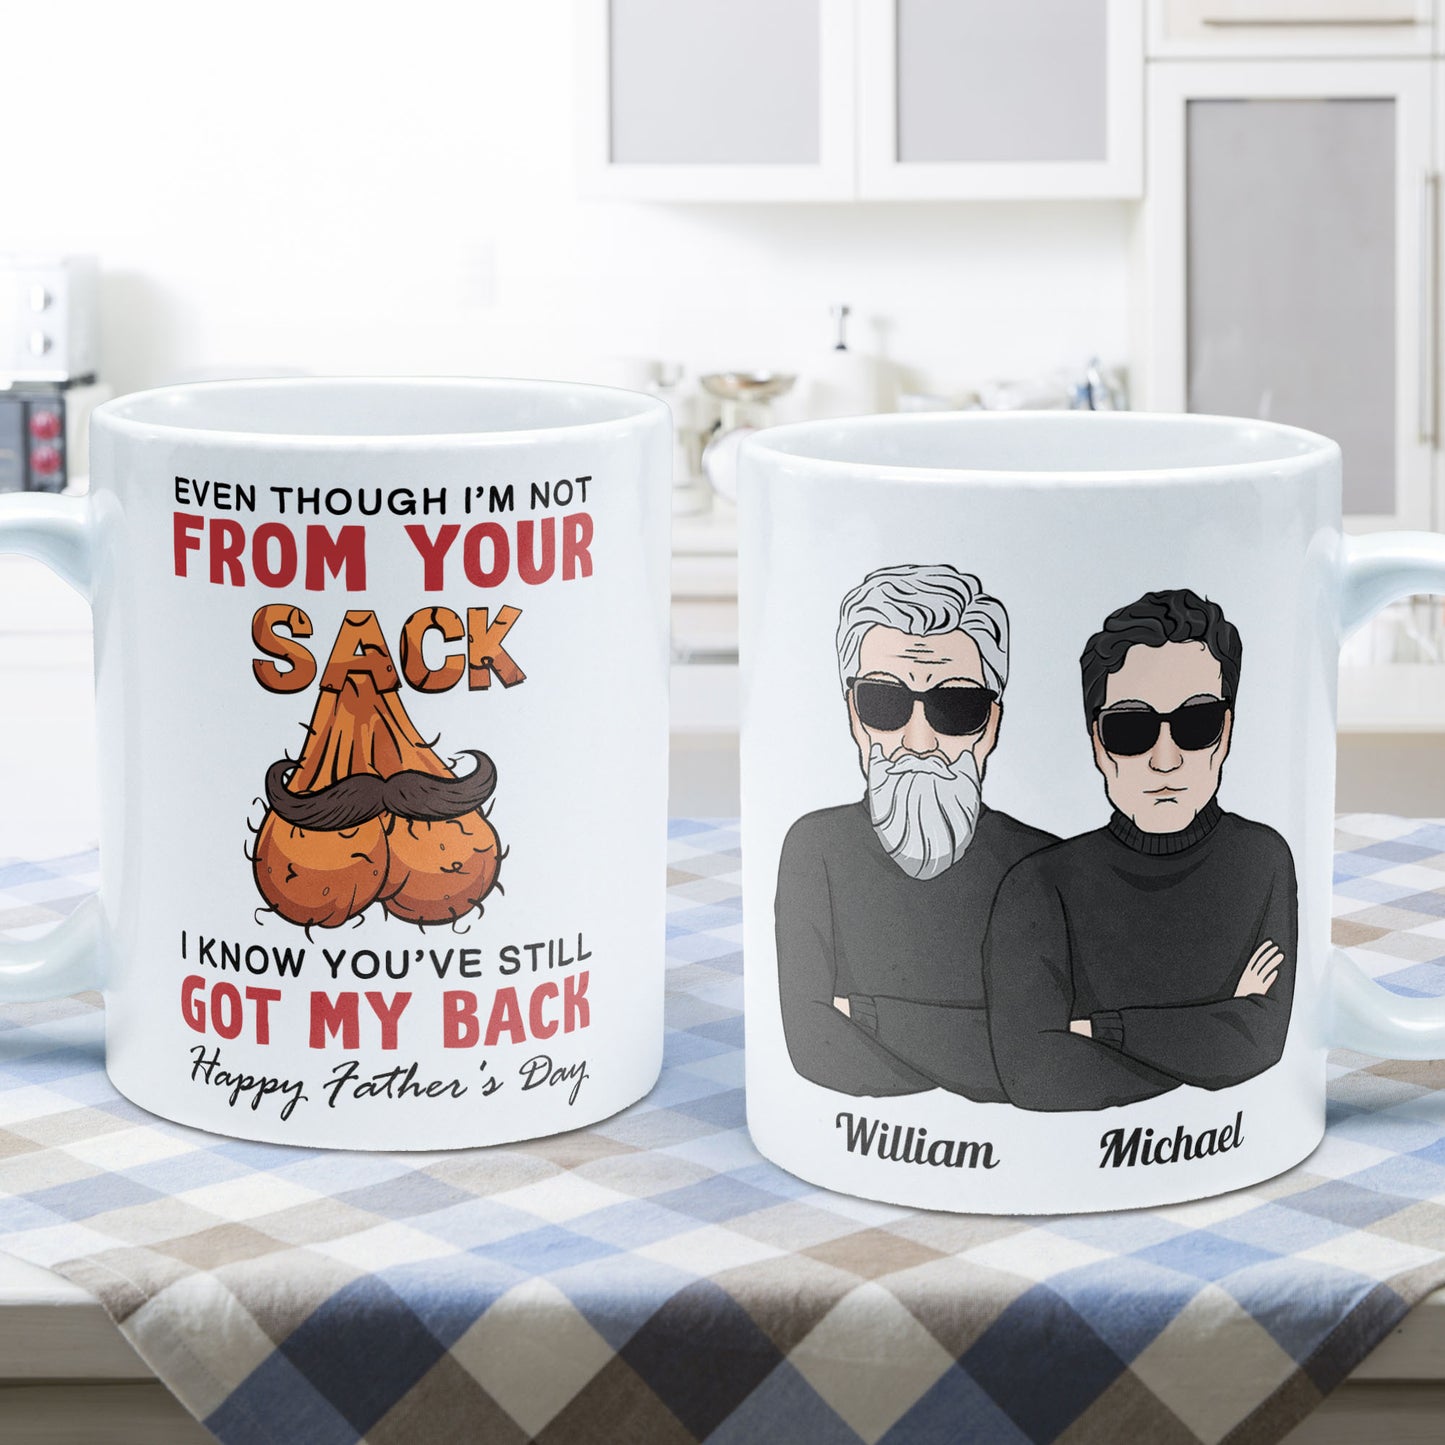 Not From Your Sack - Personalized Mug - Birthday, Christmas, Funny, Father's Day Gift For Bonus Dad, Step Dad, Dad, Father, Papa